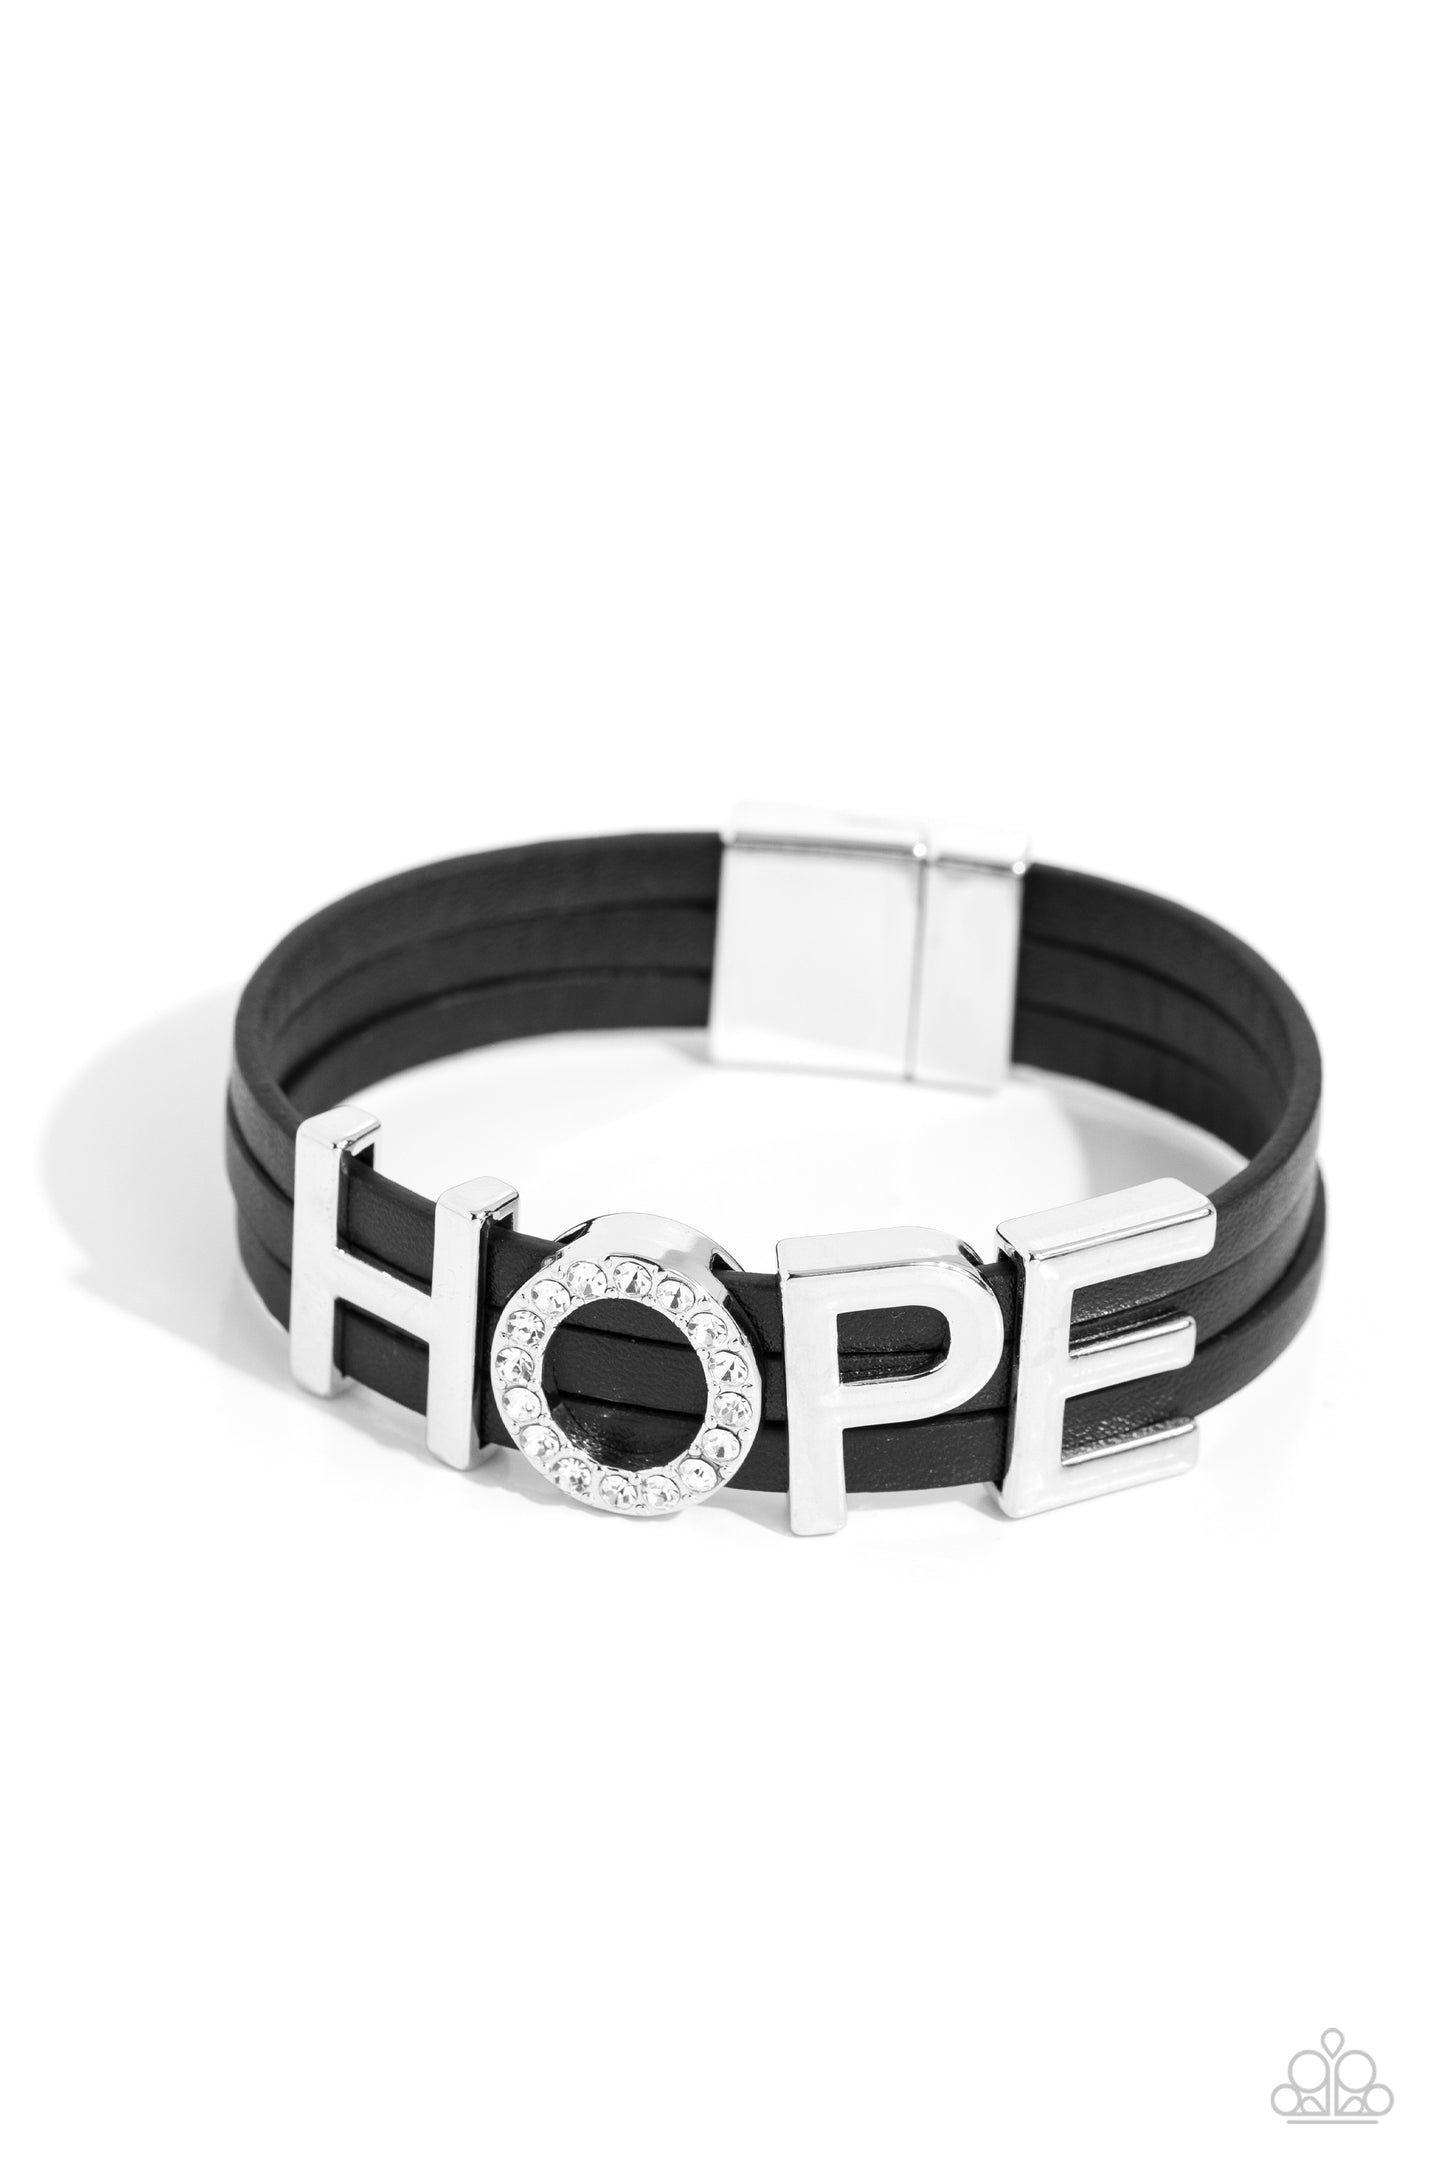 Hopeful Haute Black Wrap Bracelet - Paparazzi Accessories  Threaded along layers of black leather strands, glistening silver letters form the word "HOPE" with the "O" embossed in white rhinestones for a dazzling statement. Features a magnetic closure.  Sold as one individual bracelet.  SKU: P9SE-BKXX-345XX